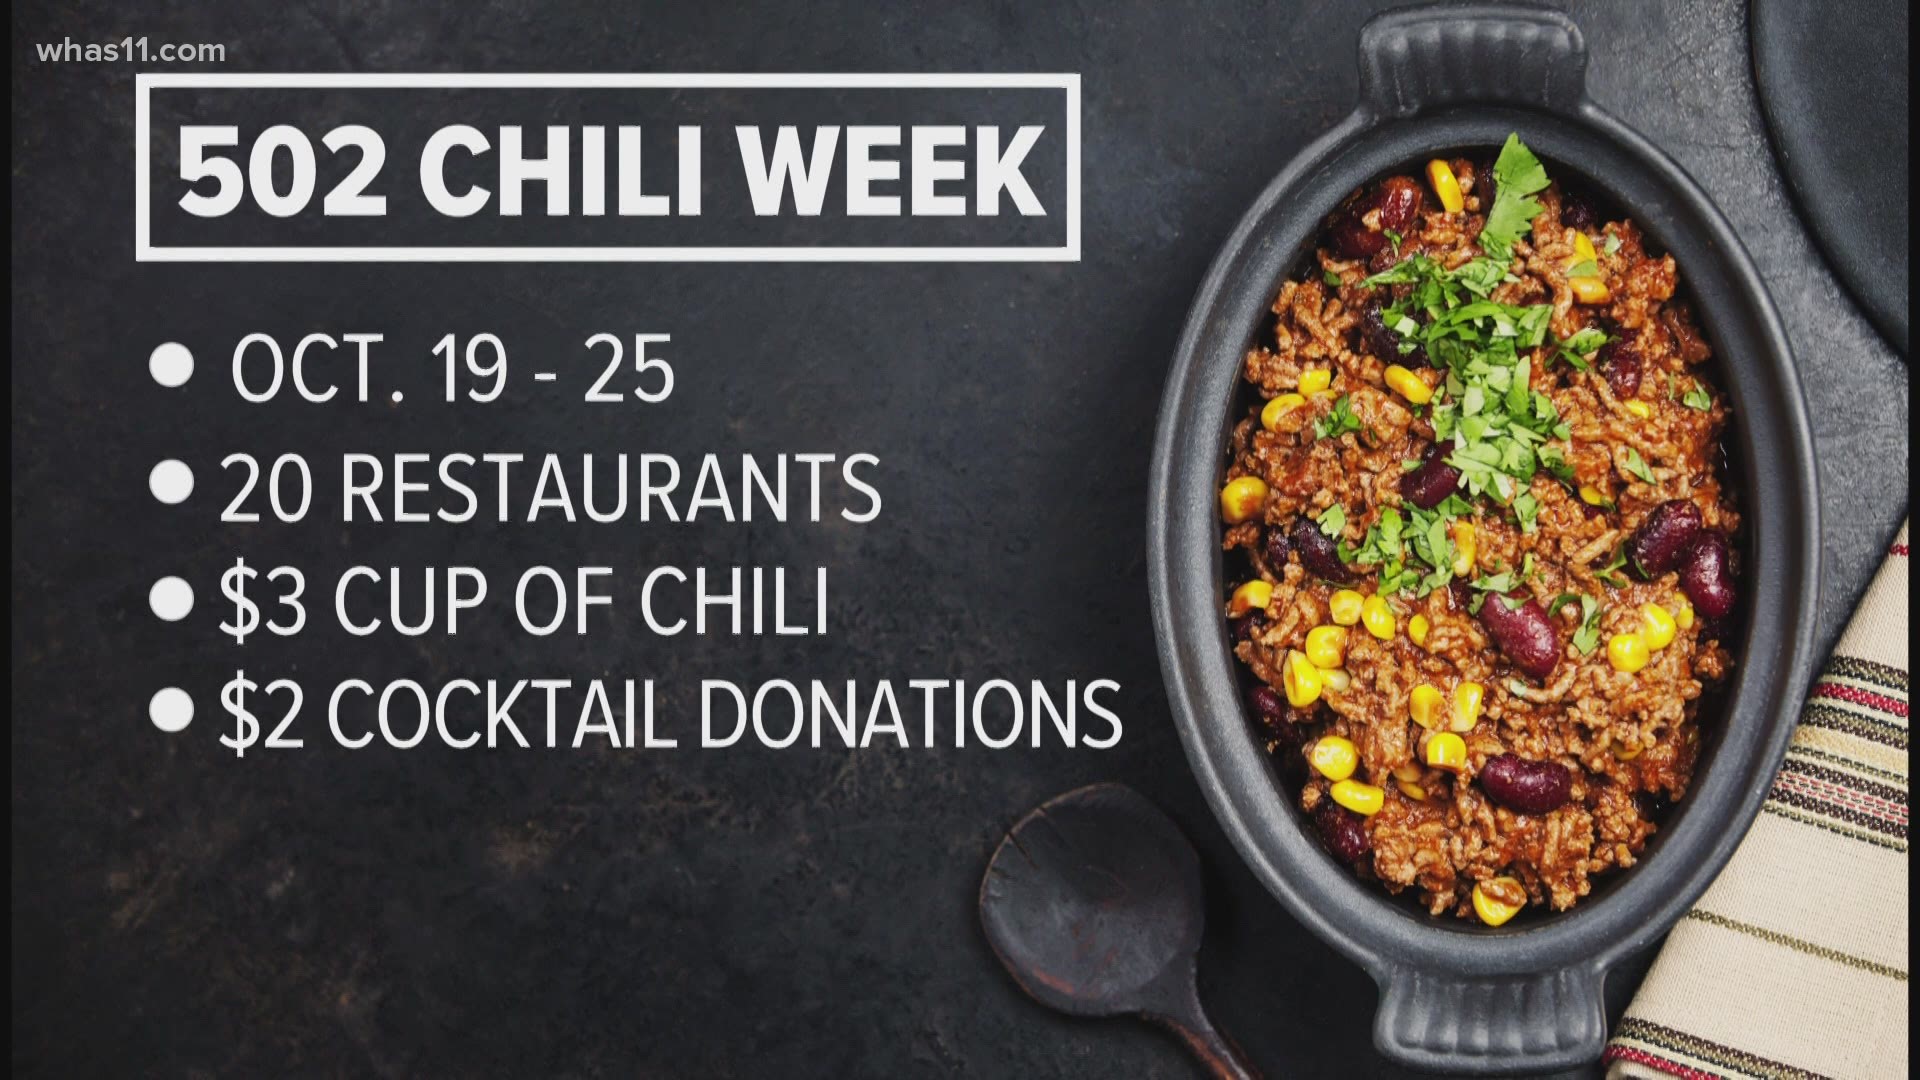 502 Chili Week in Louisville: Where to find $3 cups of chili | www.semashow.com